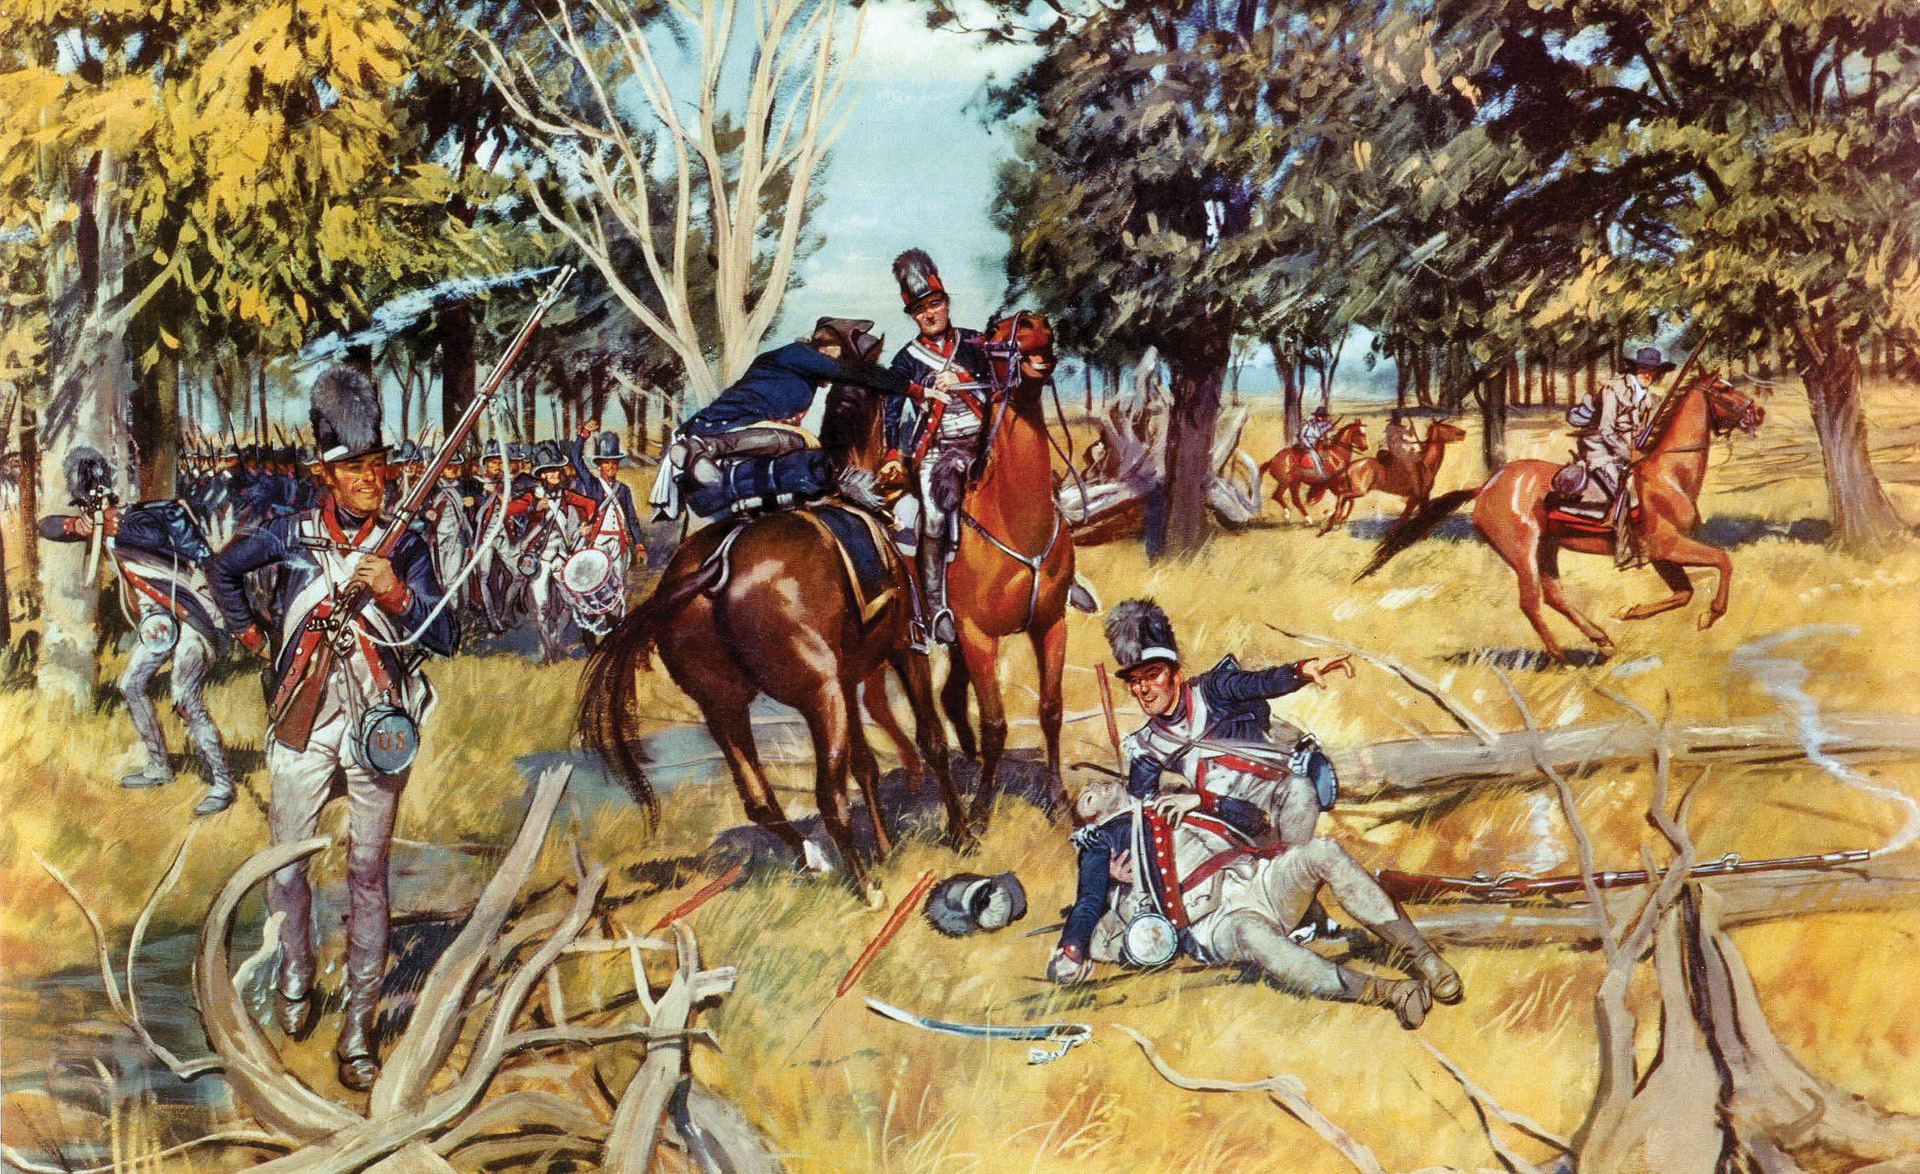 Maj. Gen. “Mad Anthony” Wayne’s well-trained regulars inflicted stinging retribution on the tribes of the Western Confederacy after defeating them at Fallen Timbers. 